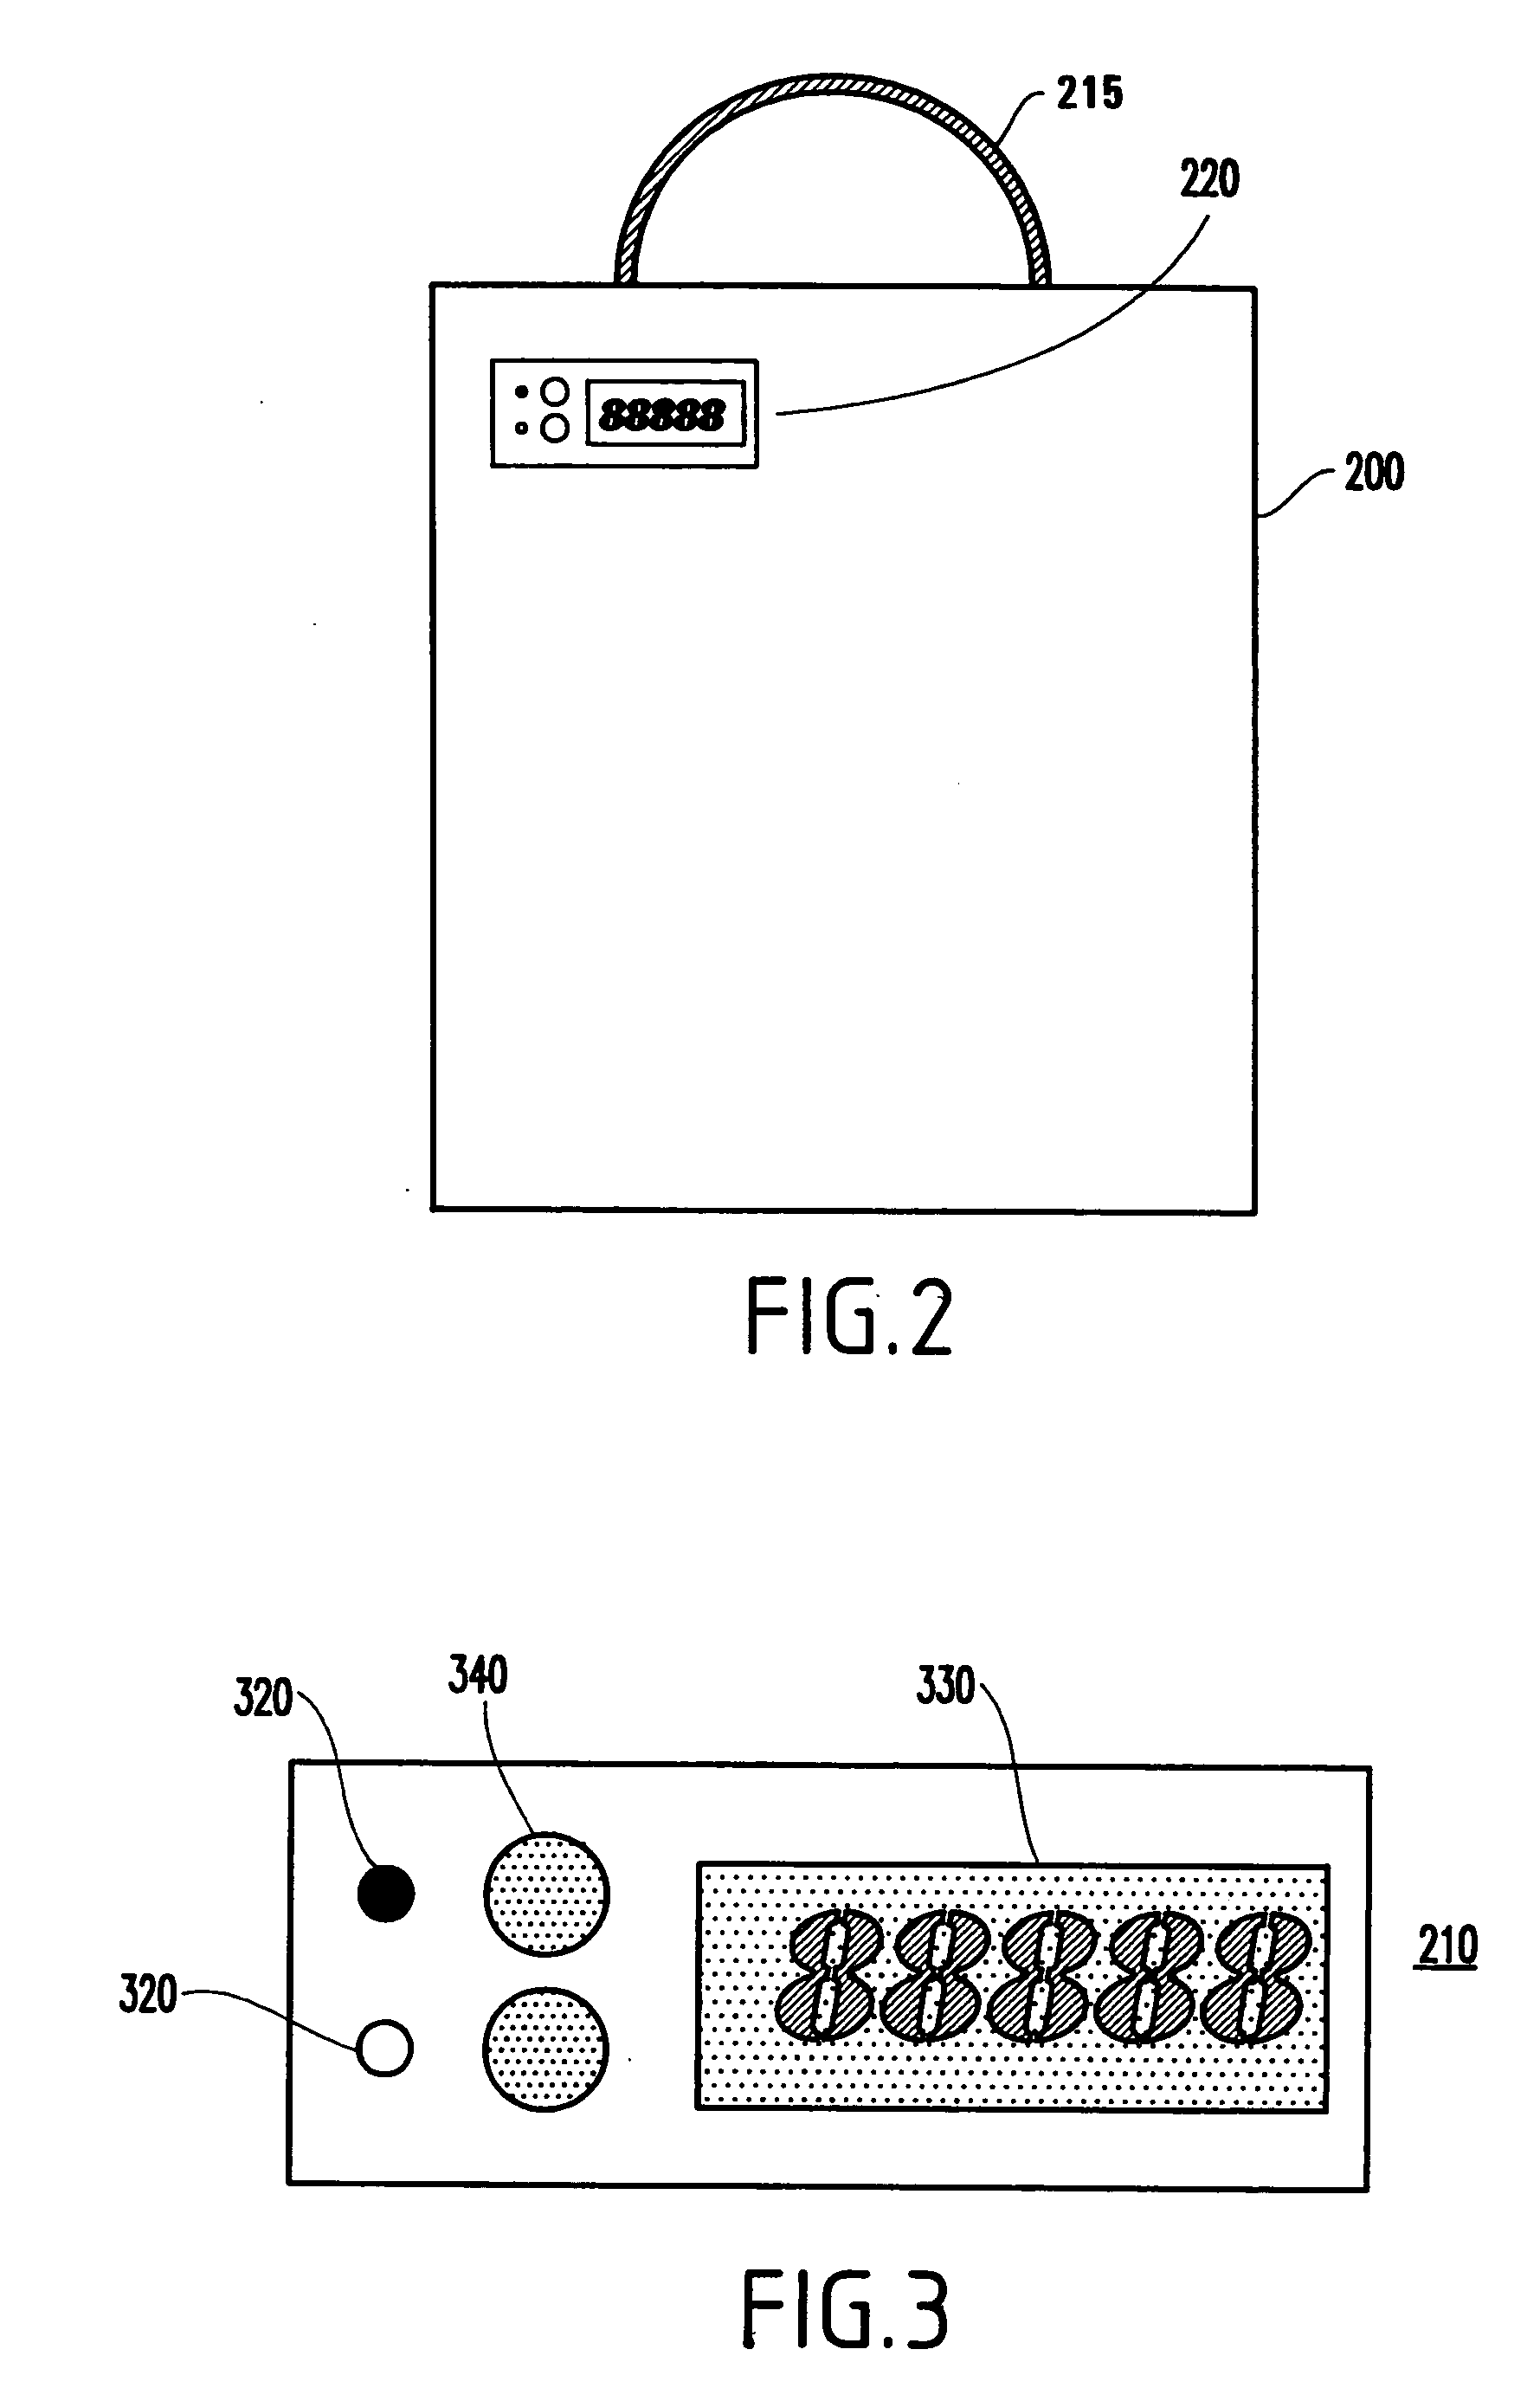 System and method for minimizing package delivery time